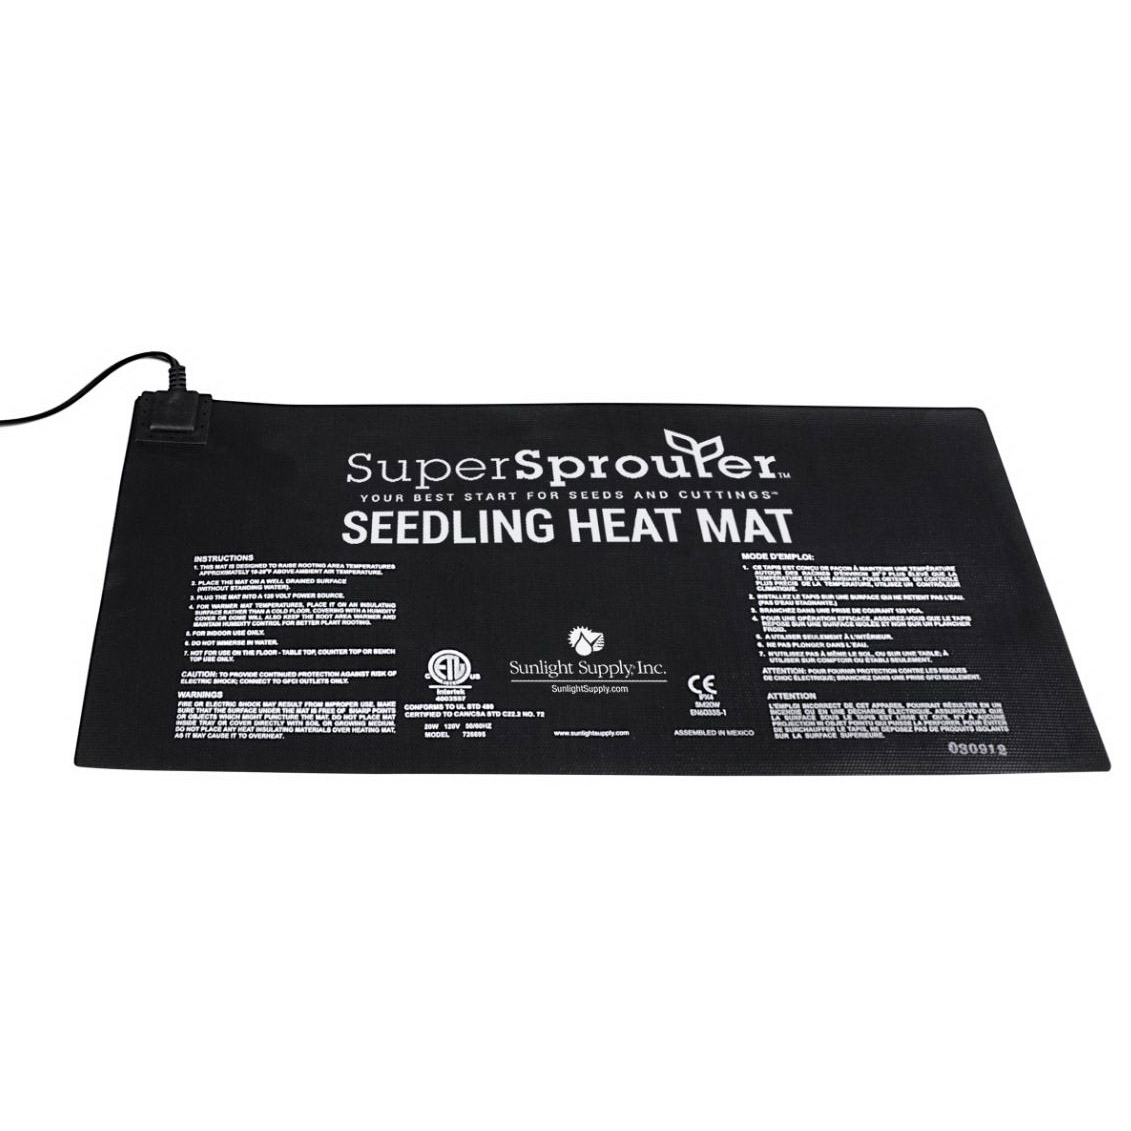 Super Sprouter Y03 726695 Seedling Heat Mat, 21 in L, 10 in W, 120 V - 2